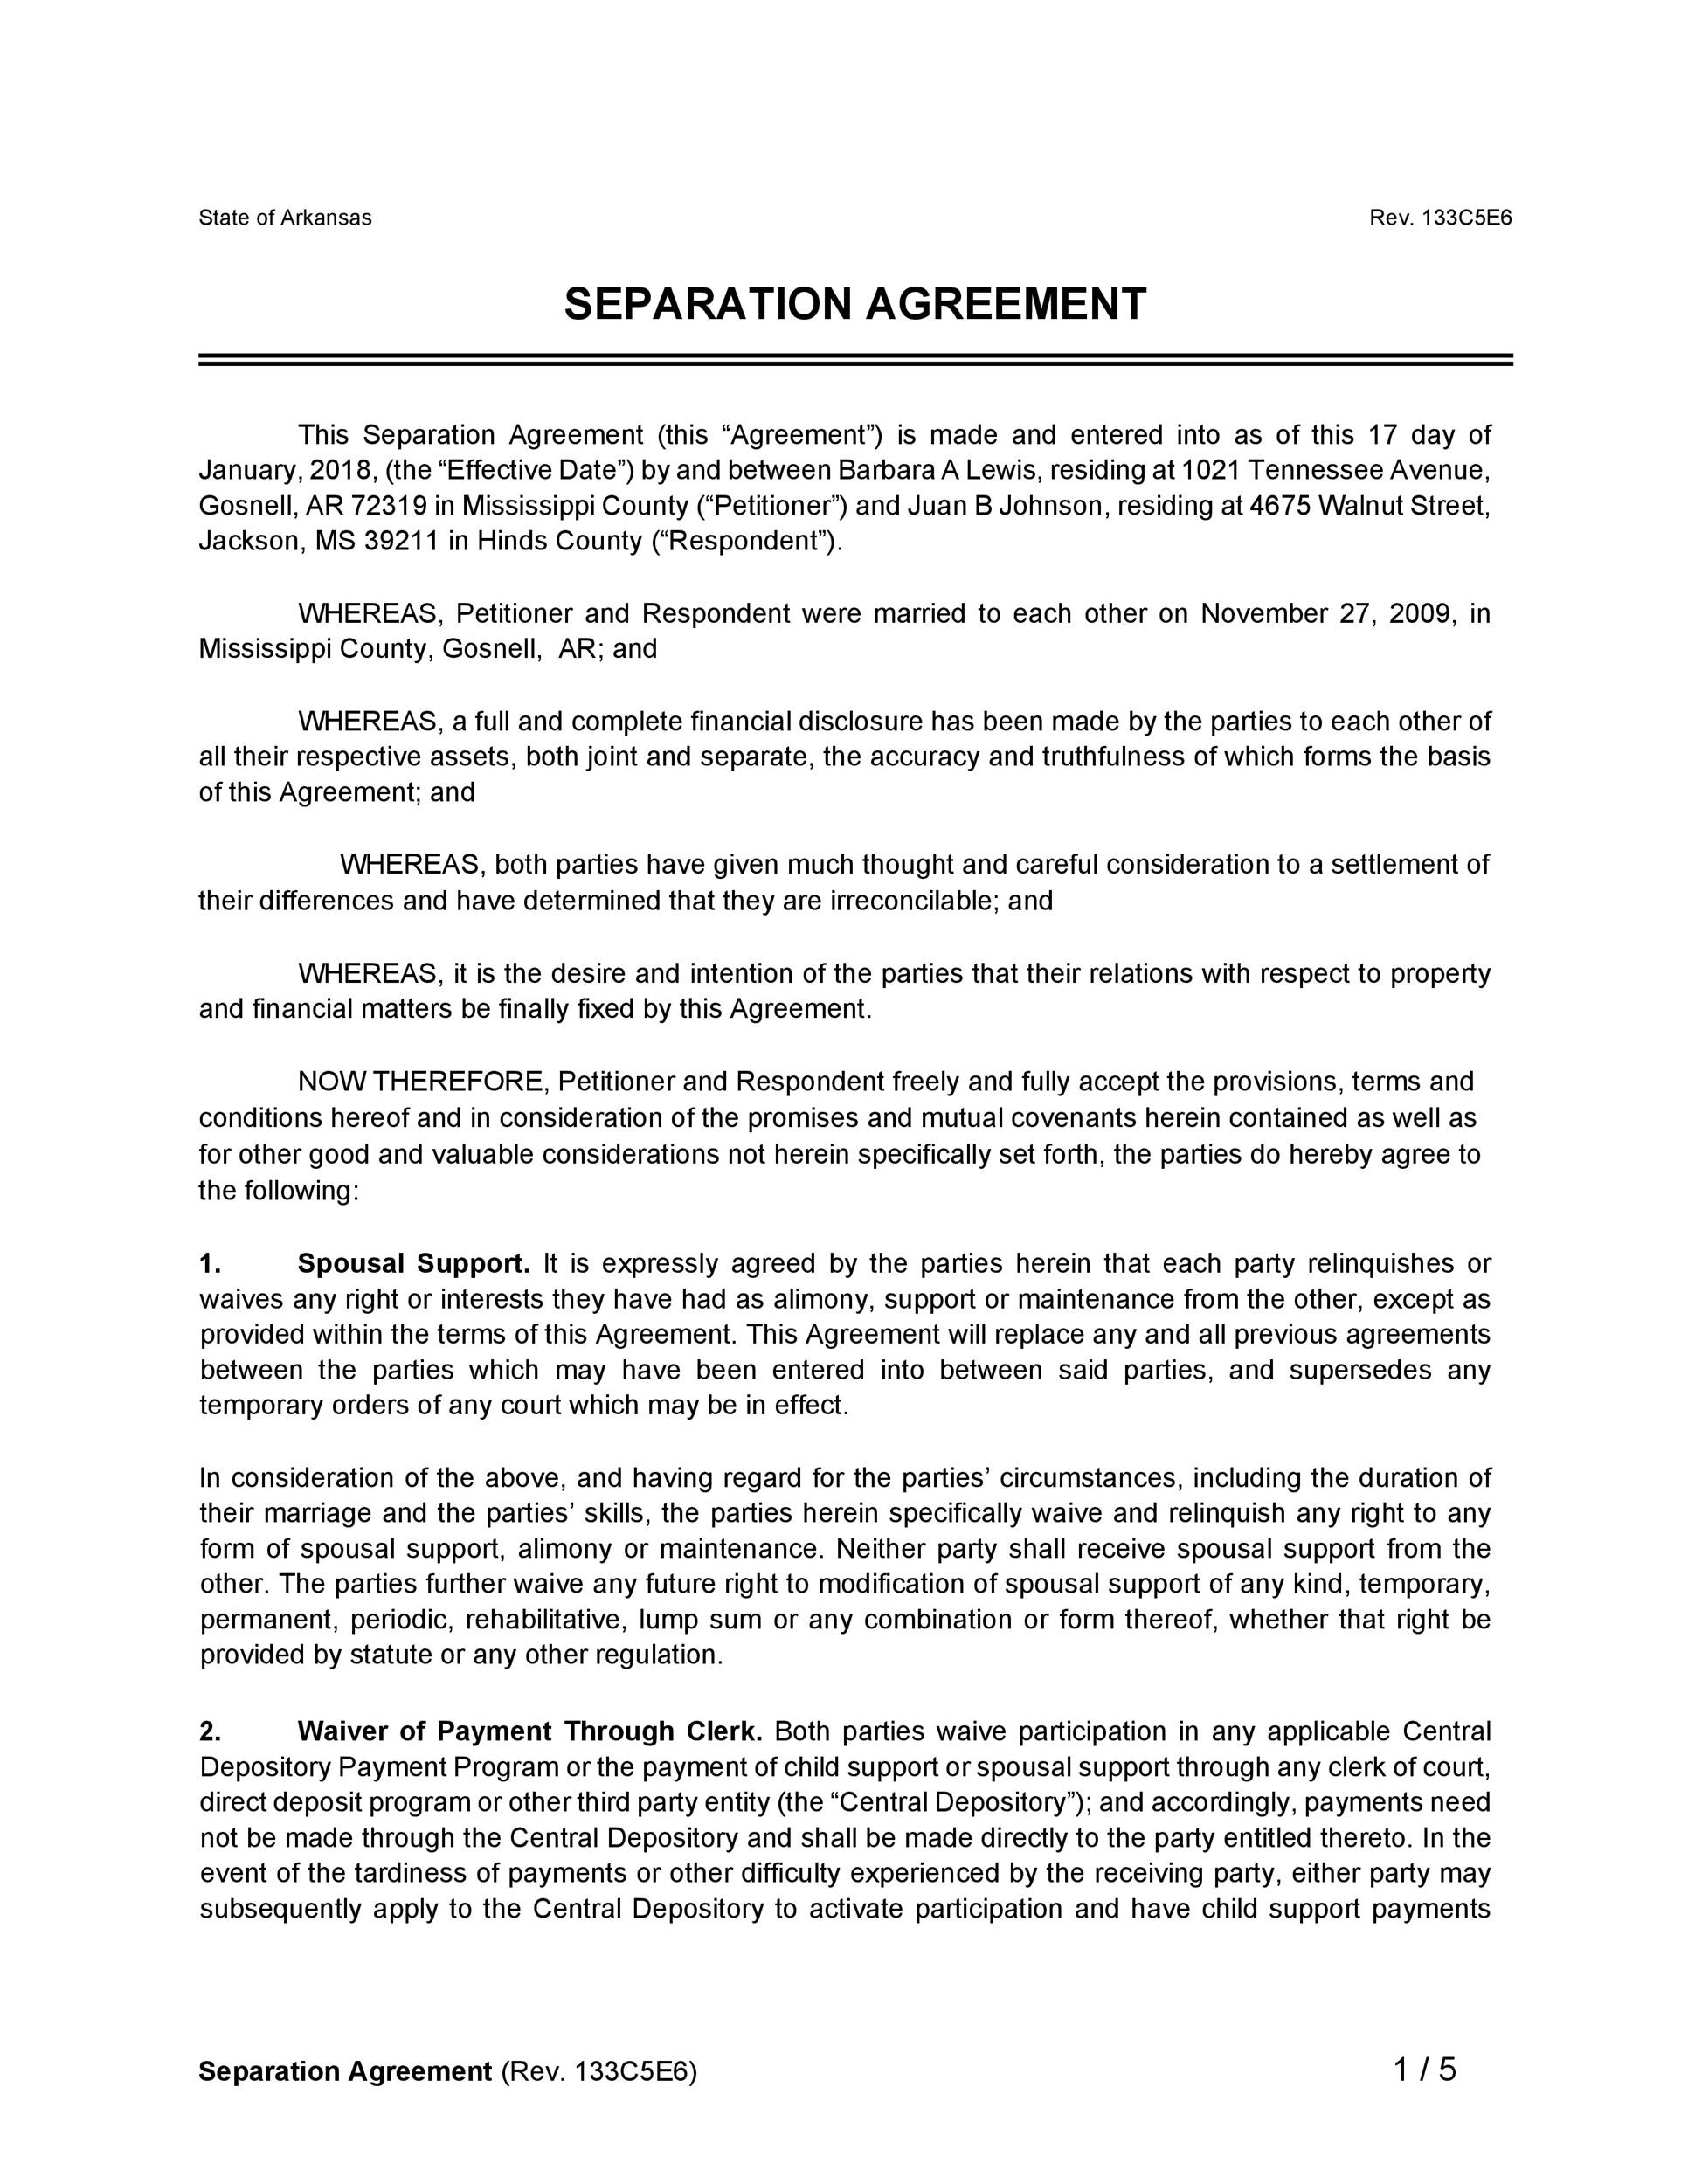 mutual separation agreement template south africa pdf